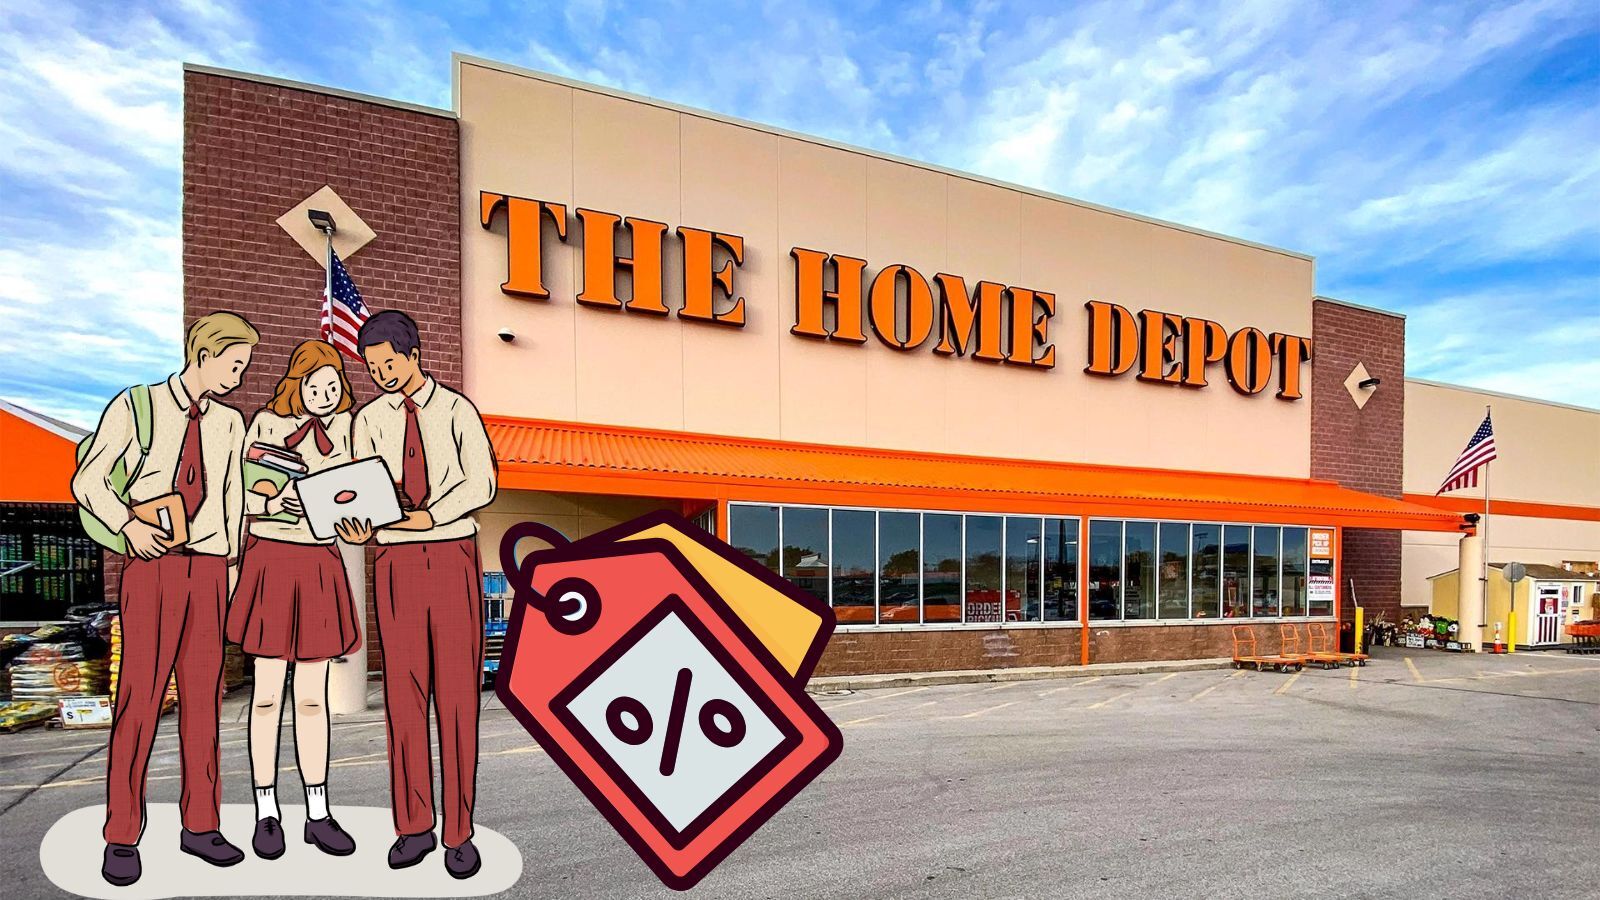 Home Depot Student Discount: No Longer Available? You Can Try This...